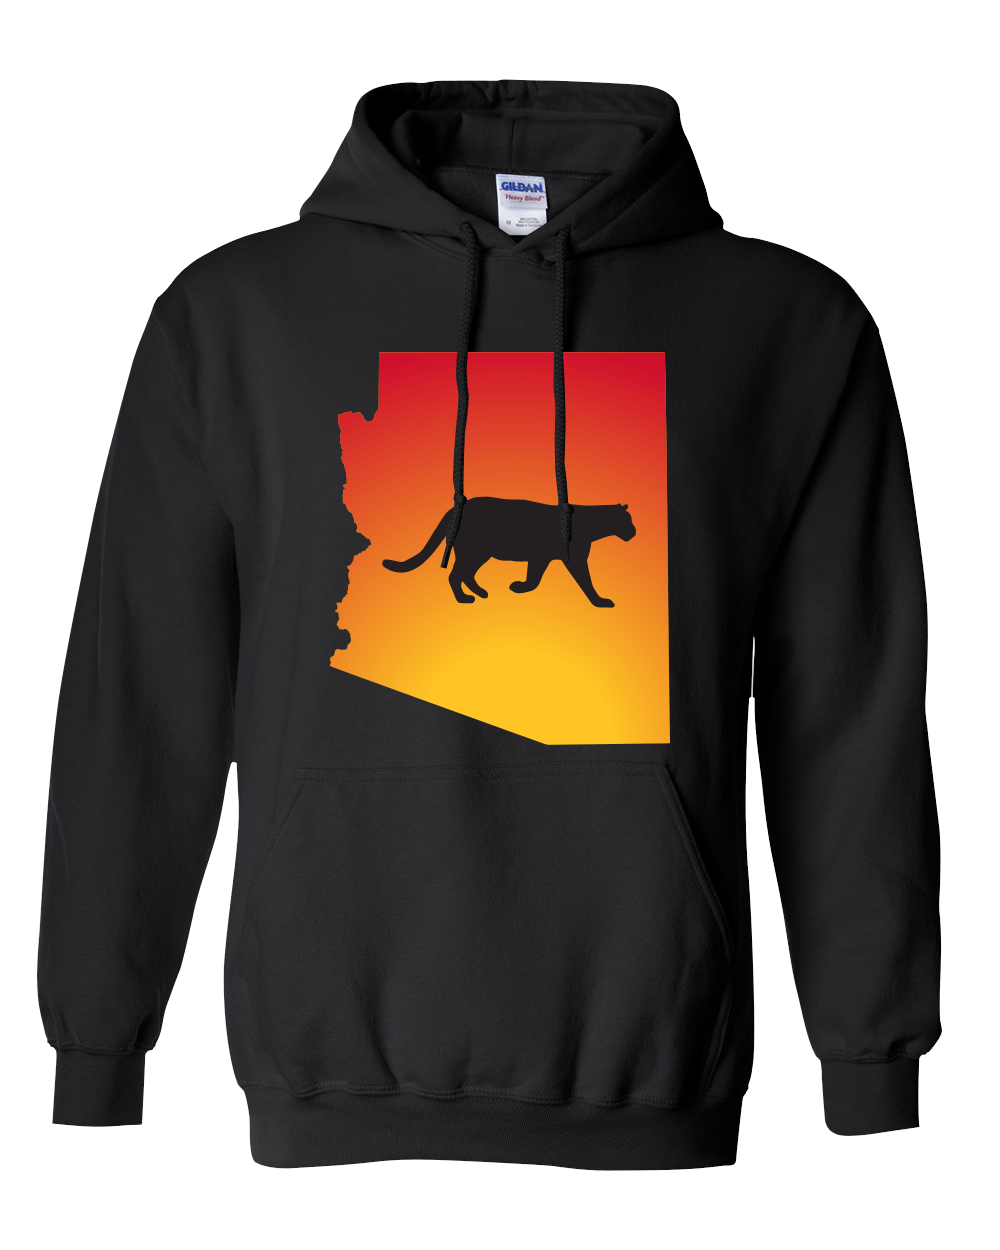 Pullover Hooded Sweatshirt Arizona Black Mountain Lion Vibrant Design High Quality Tight Knit Ring Spun Low Maintenance Cotton Printed With The Newest Available Color Transfer Technology